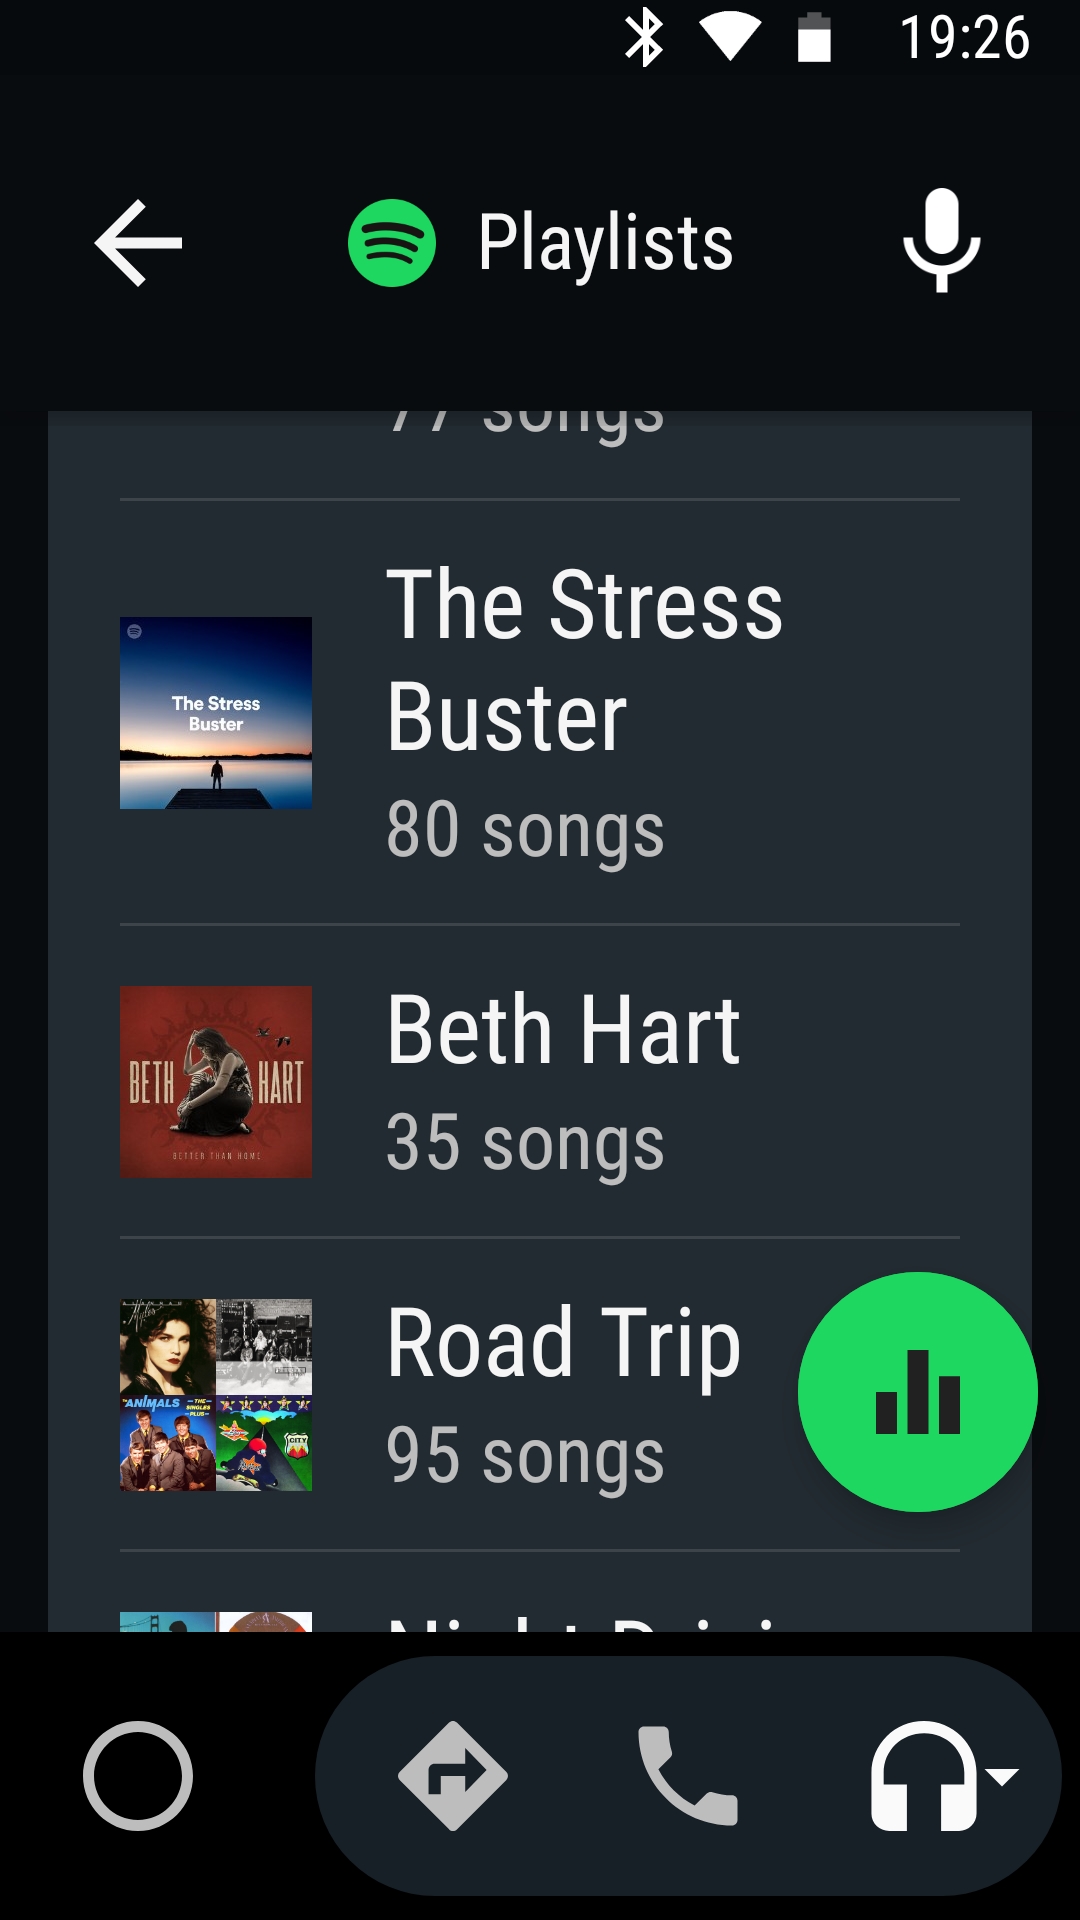 Android Auto  Spotify doesn't play offline  Page 26  The Spotify